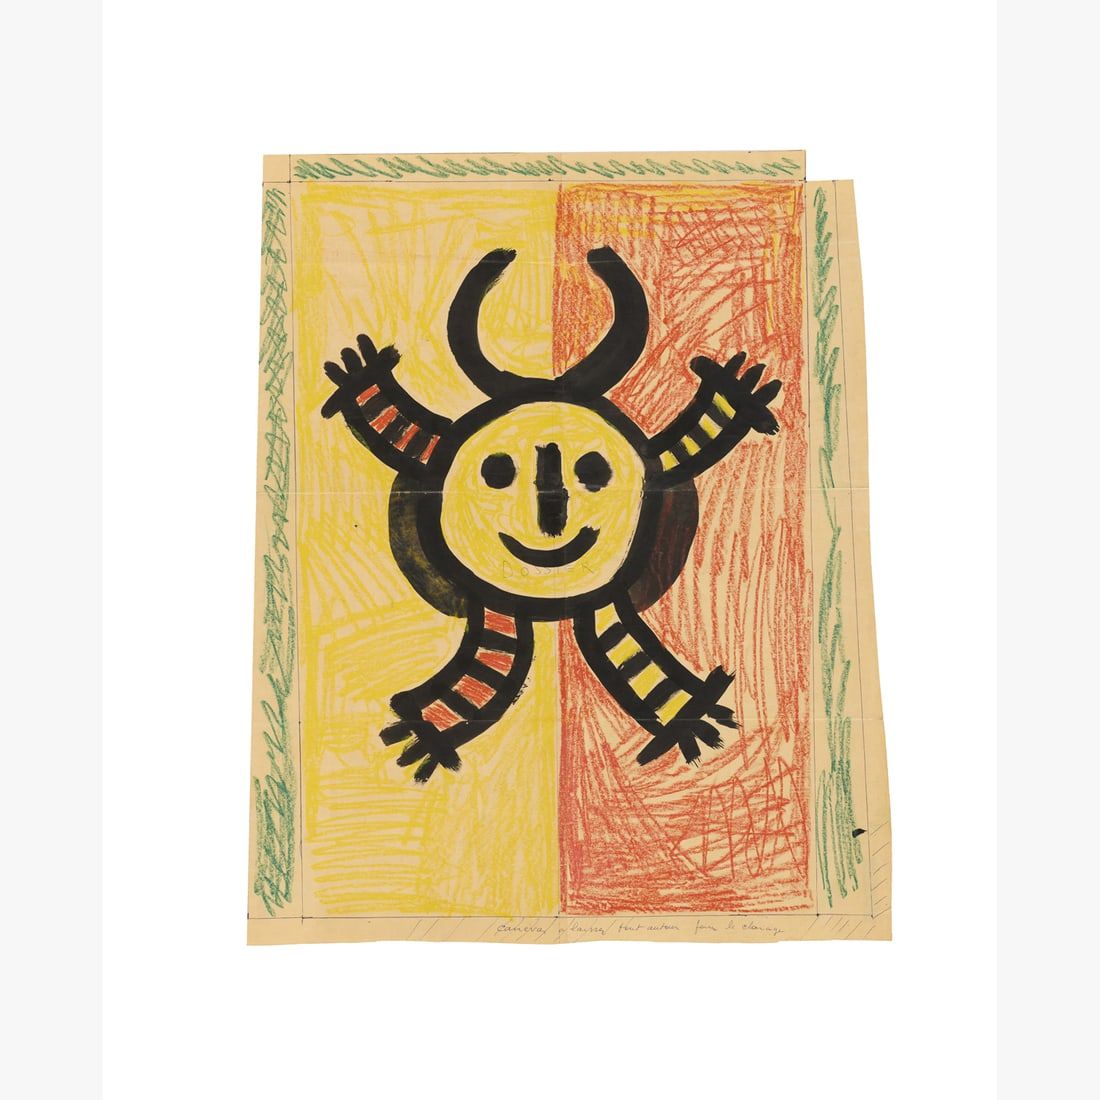 1959 Pablo Picasso Indian ink drawing Tête, Tapestry Project, which sold for €78,000 ($84,615) at Piasa.